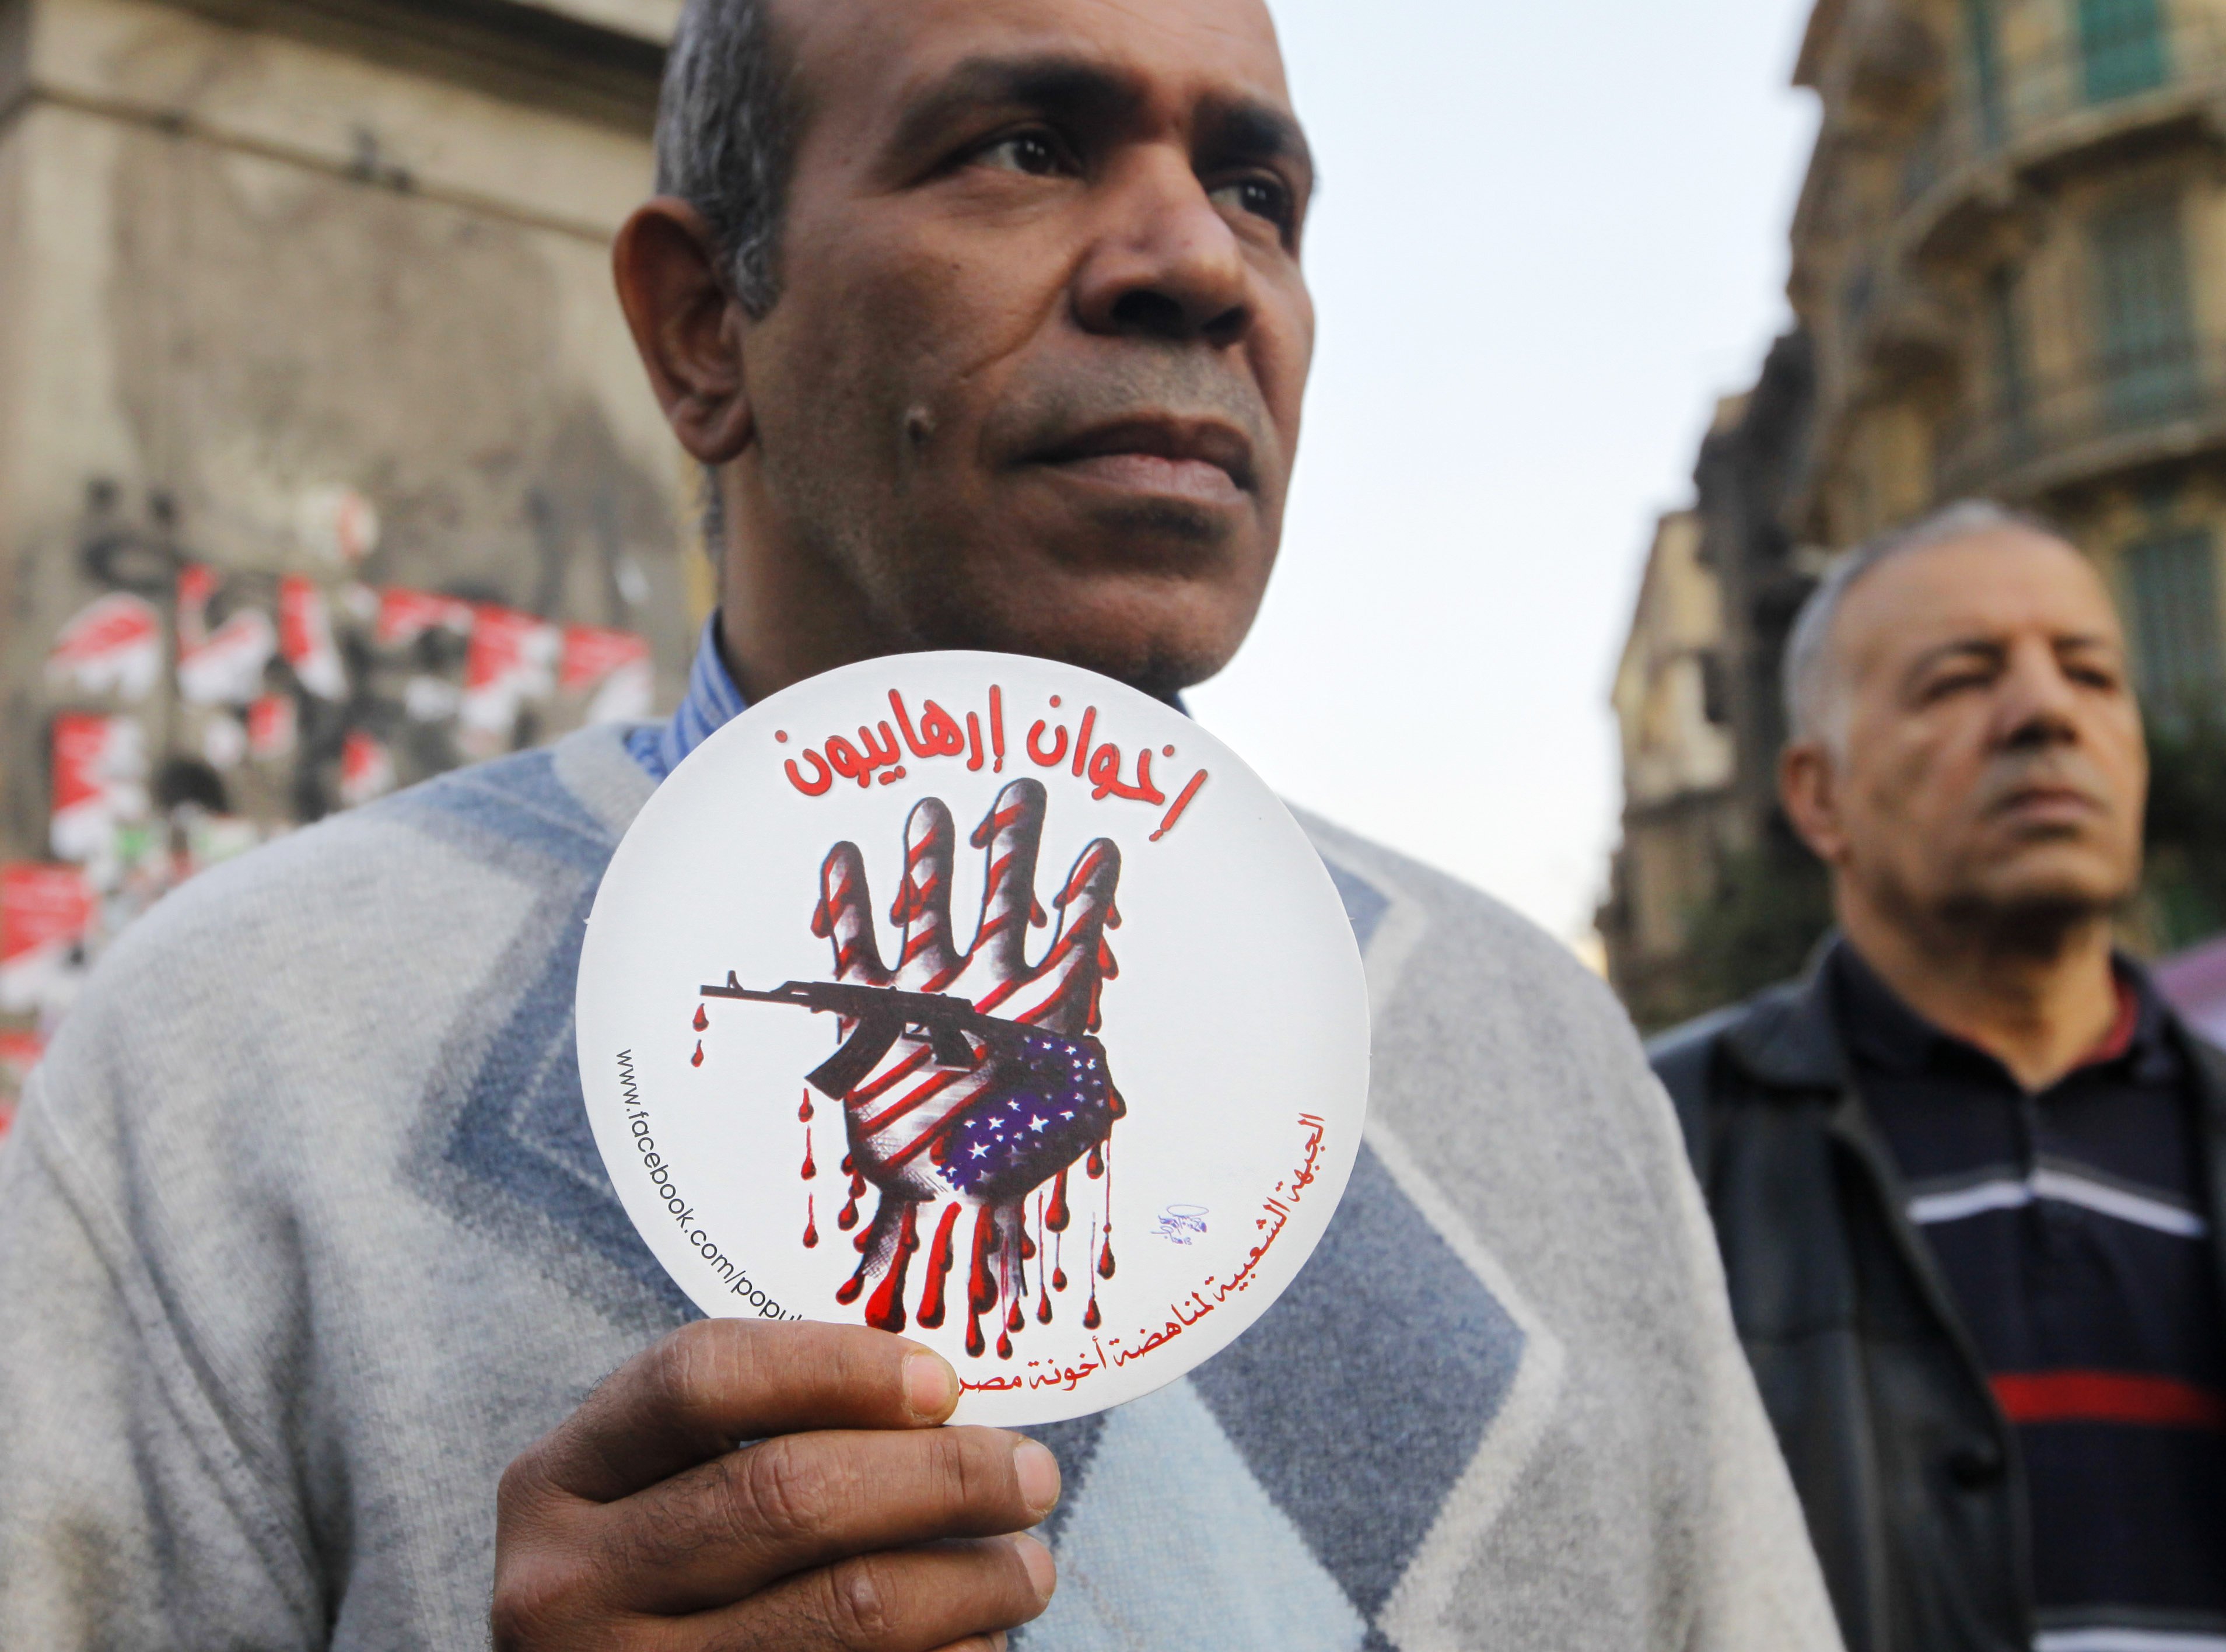 An Egyptian activist holds an anti-terrorism image with Arabic text that reads, "terrorists brotherhood". Photo: AP